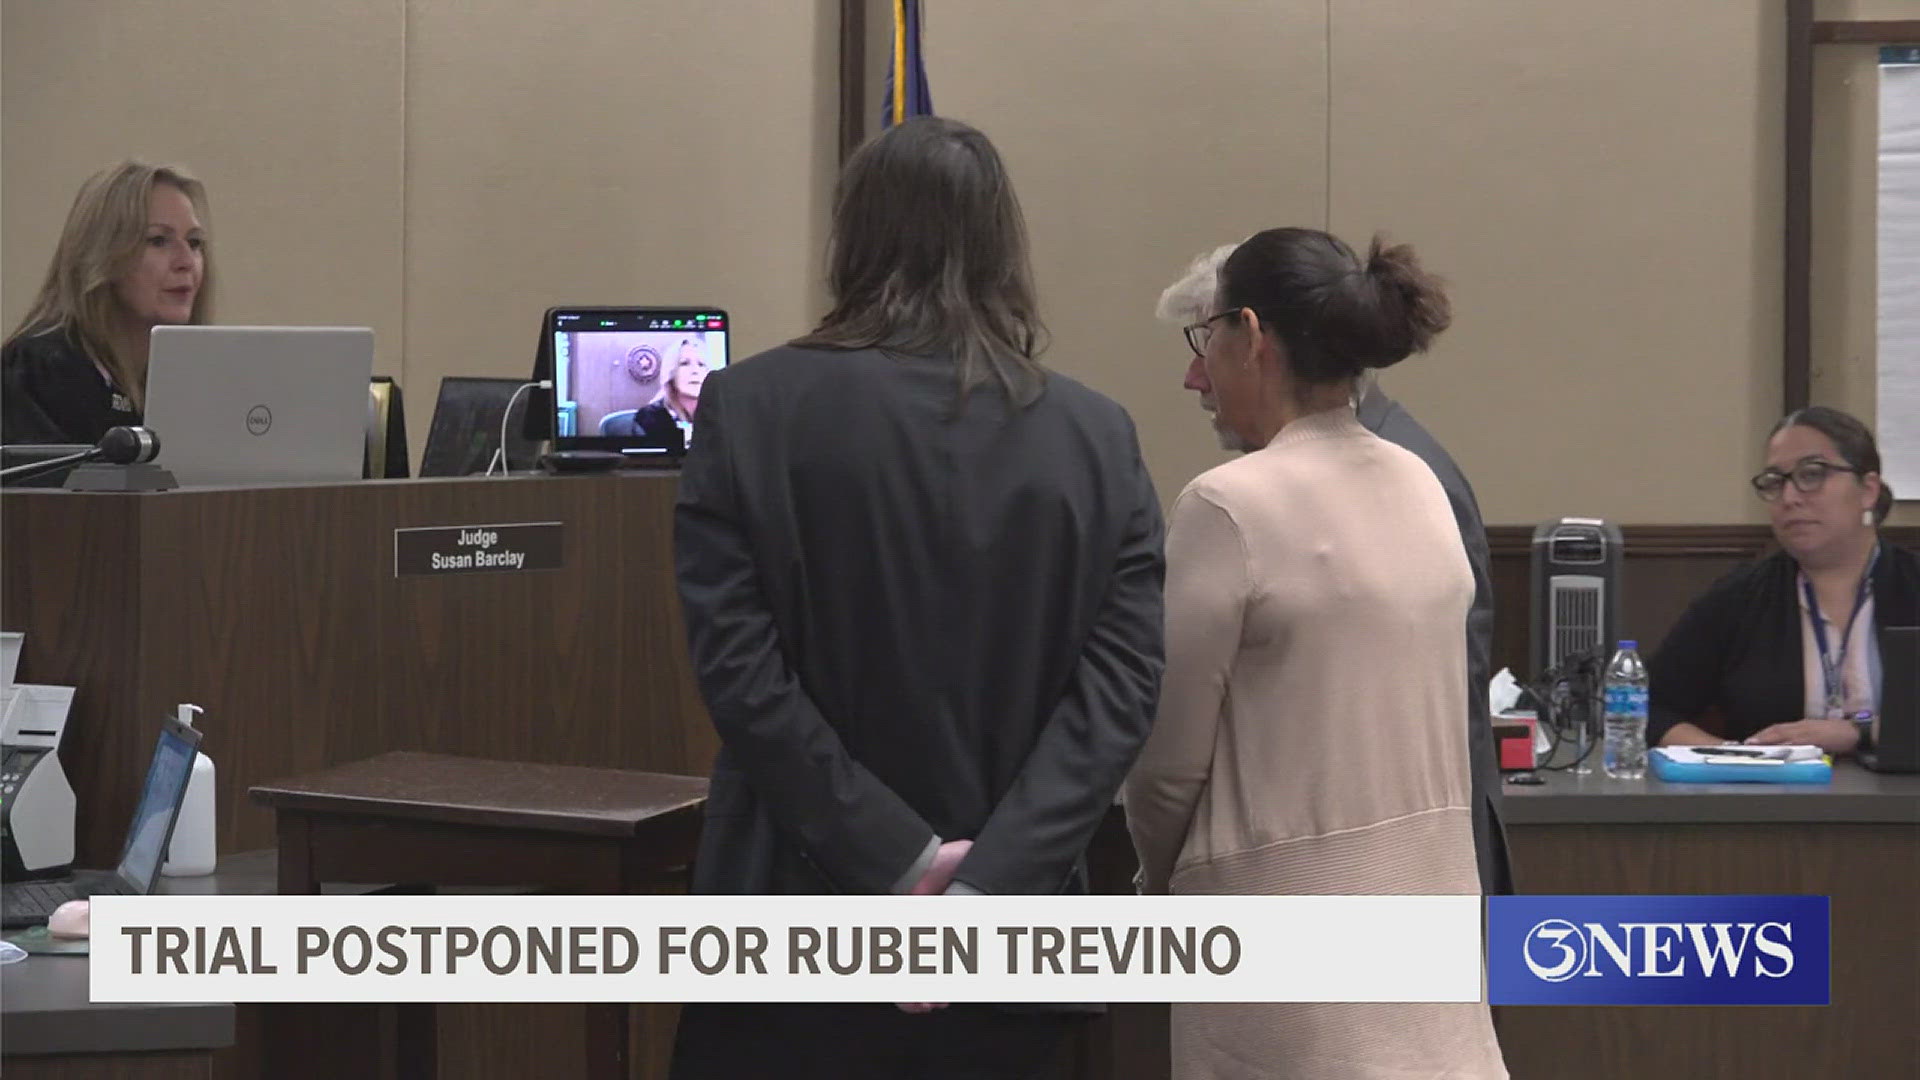 Ruben Trevino was arrested in August 2021, suspected of the shooting death of Carlos Vasquez.